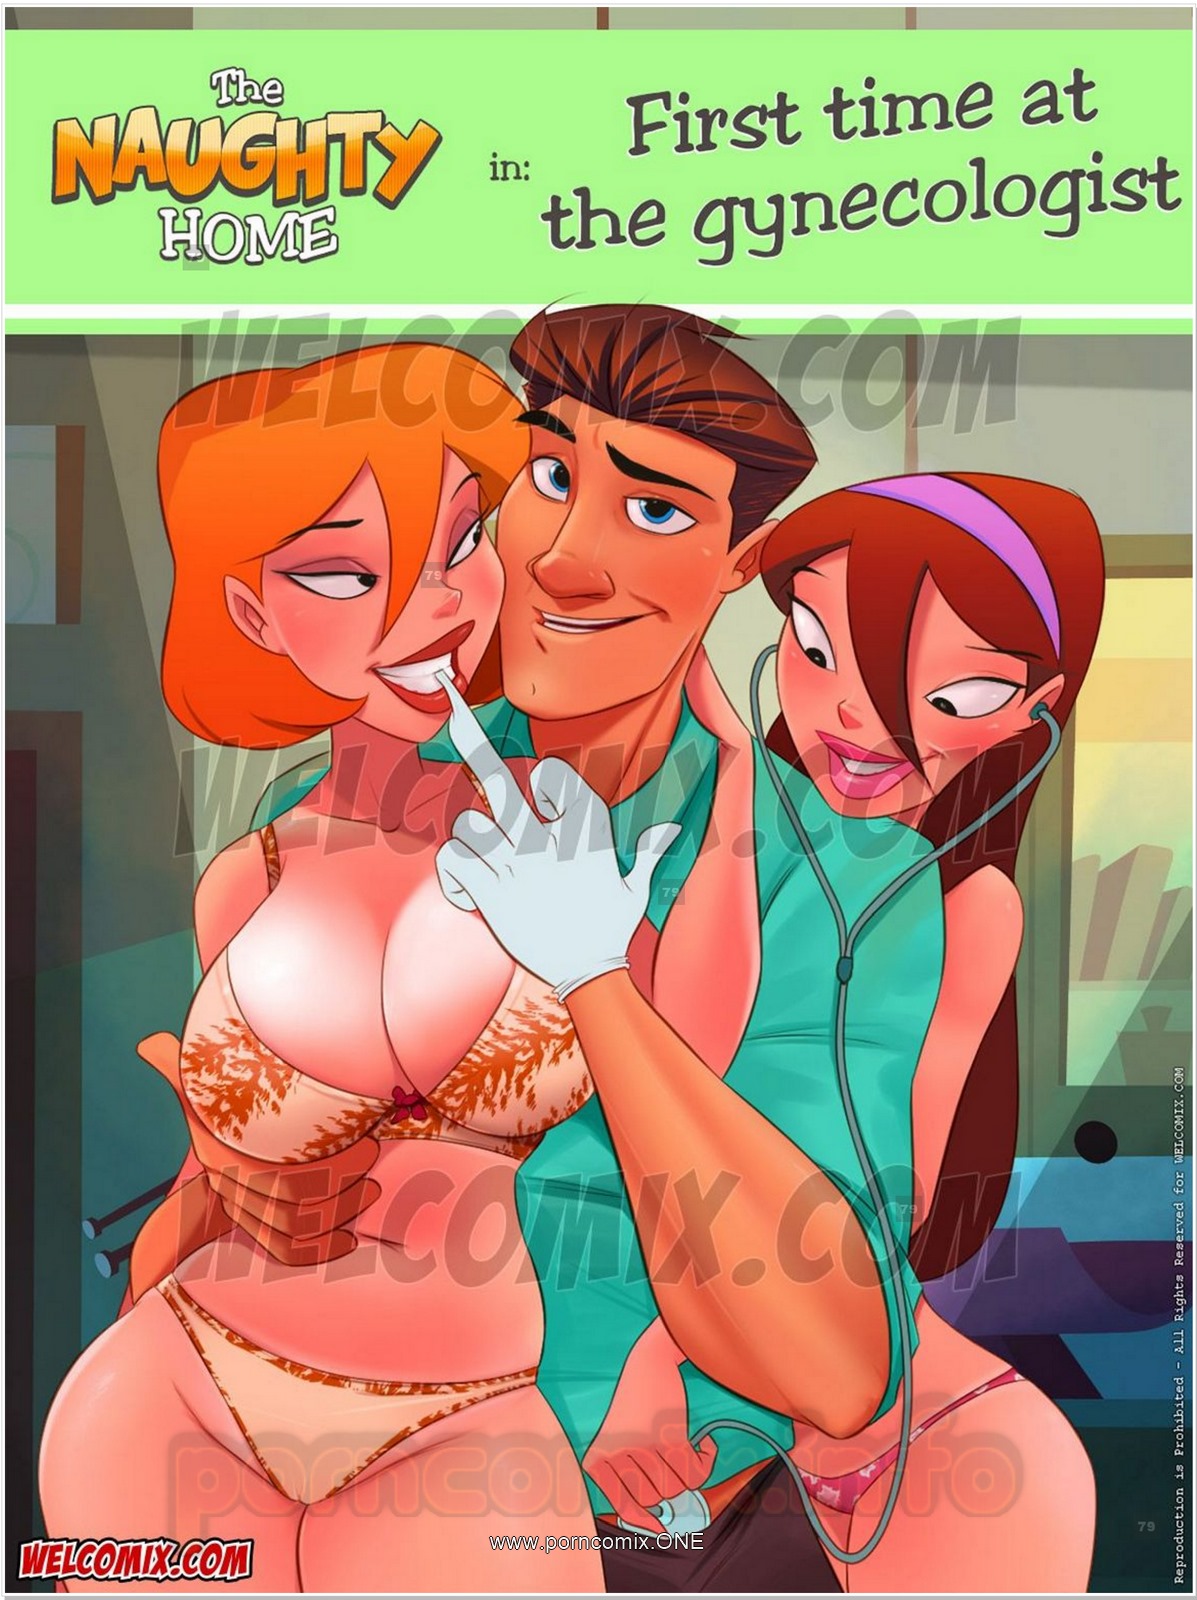 Naughty At Home - Naughty Home 25- First Time at Gynecologist - Porn Cartoon Comics